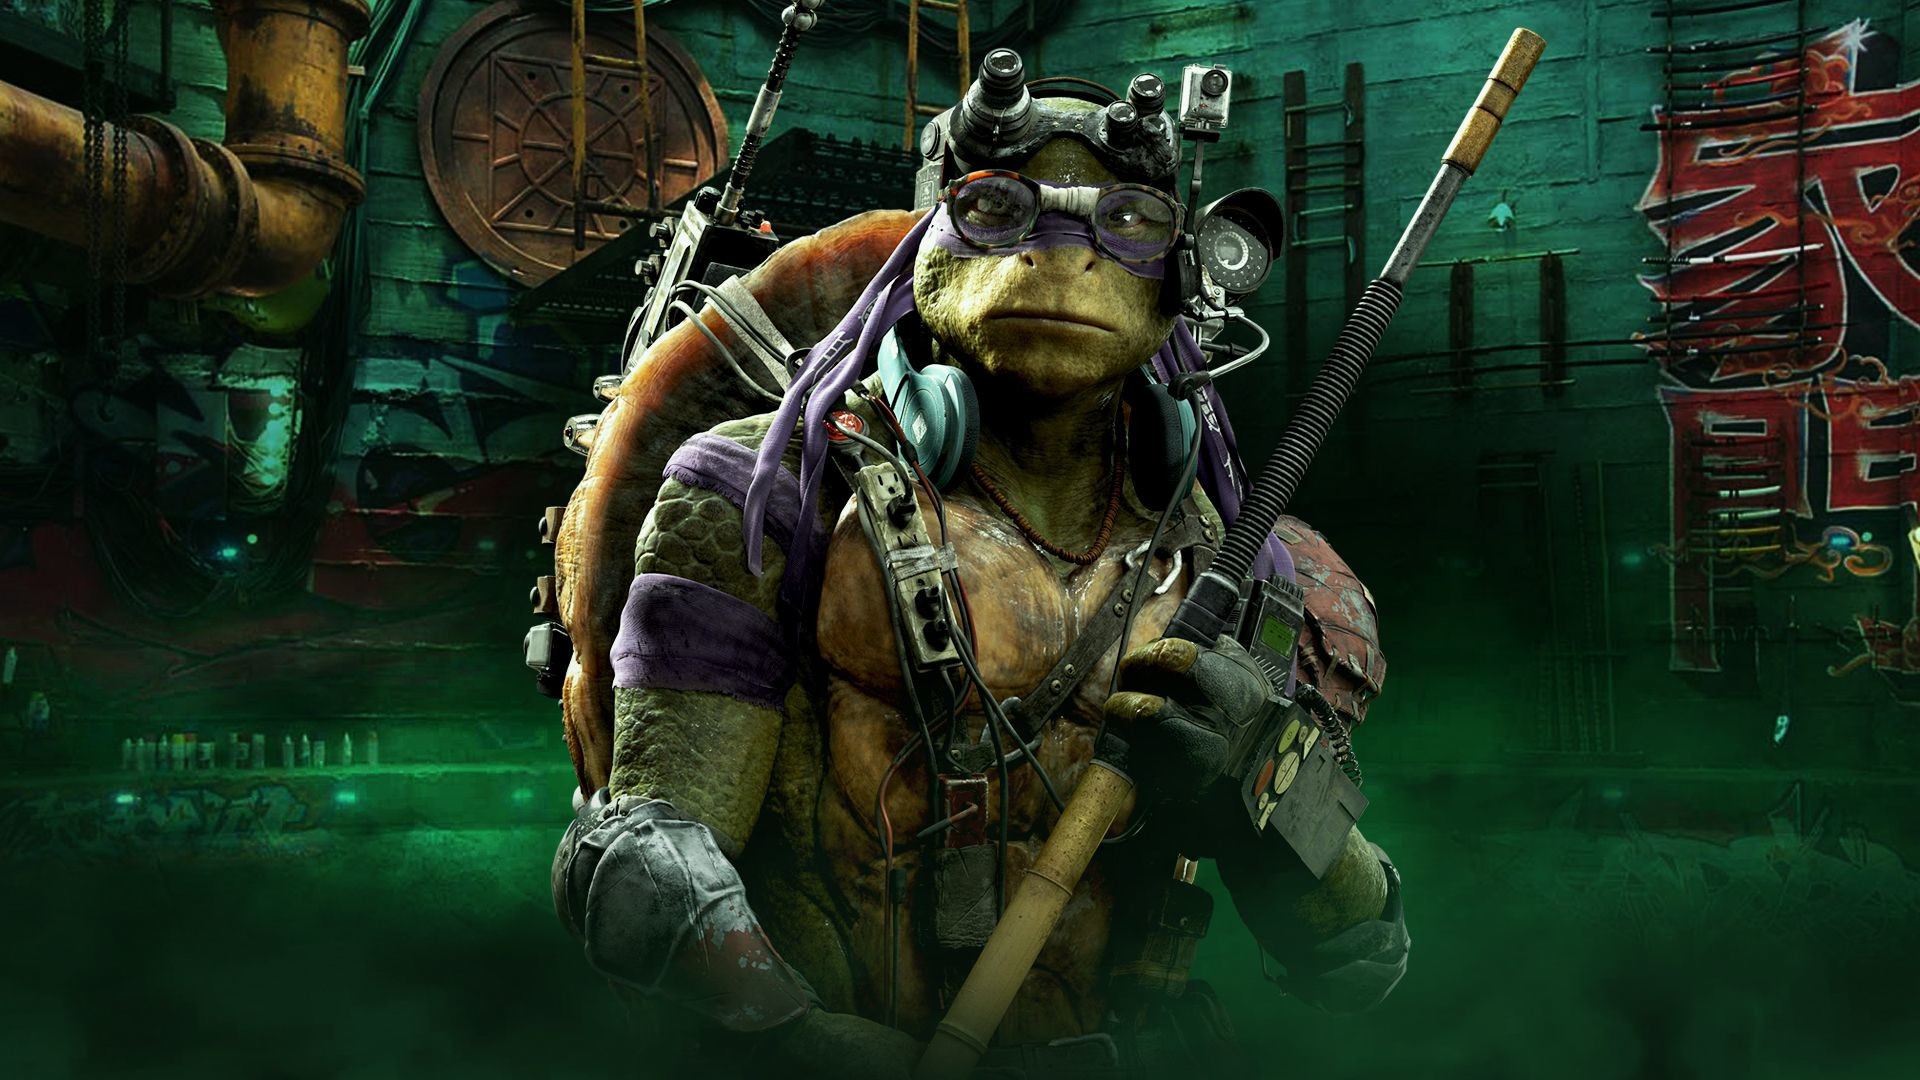 1920x1080 TMNT Donatello Wallpaper. Did you know movie Donnie is 6 feet 8 inches  tall? (according to Nickelodeon.) He's one tall 15 yr old.